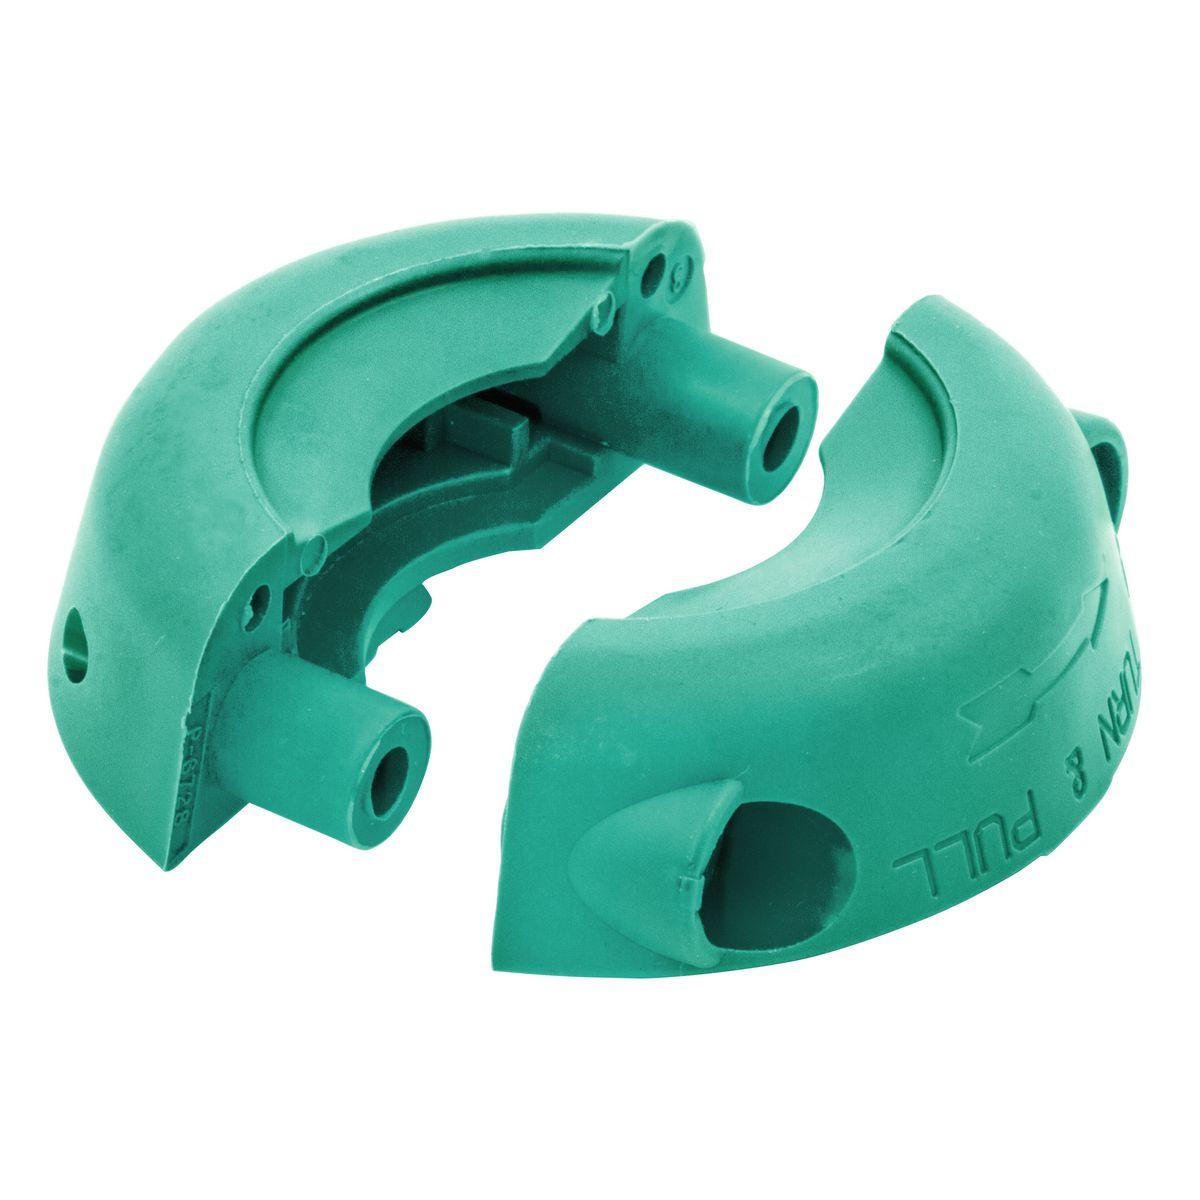 Hubbell HBLTL3CCTL Twist-Lock Devices, Colored Cord Clamp,Size 3, Teal 